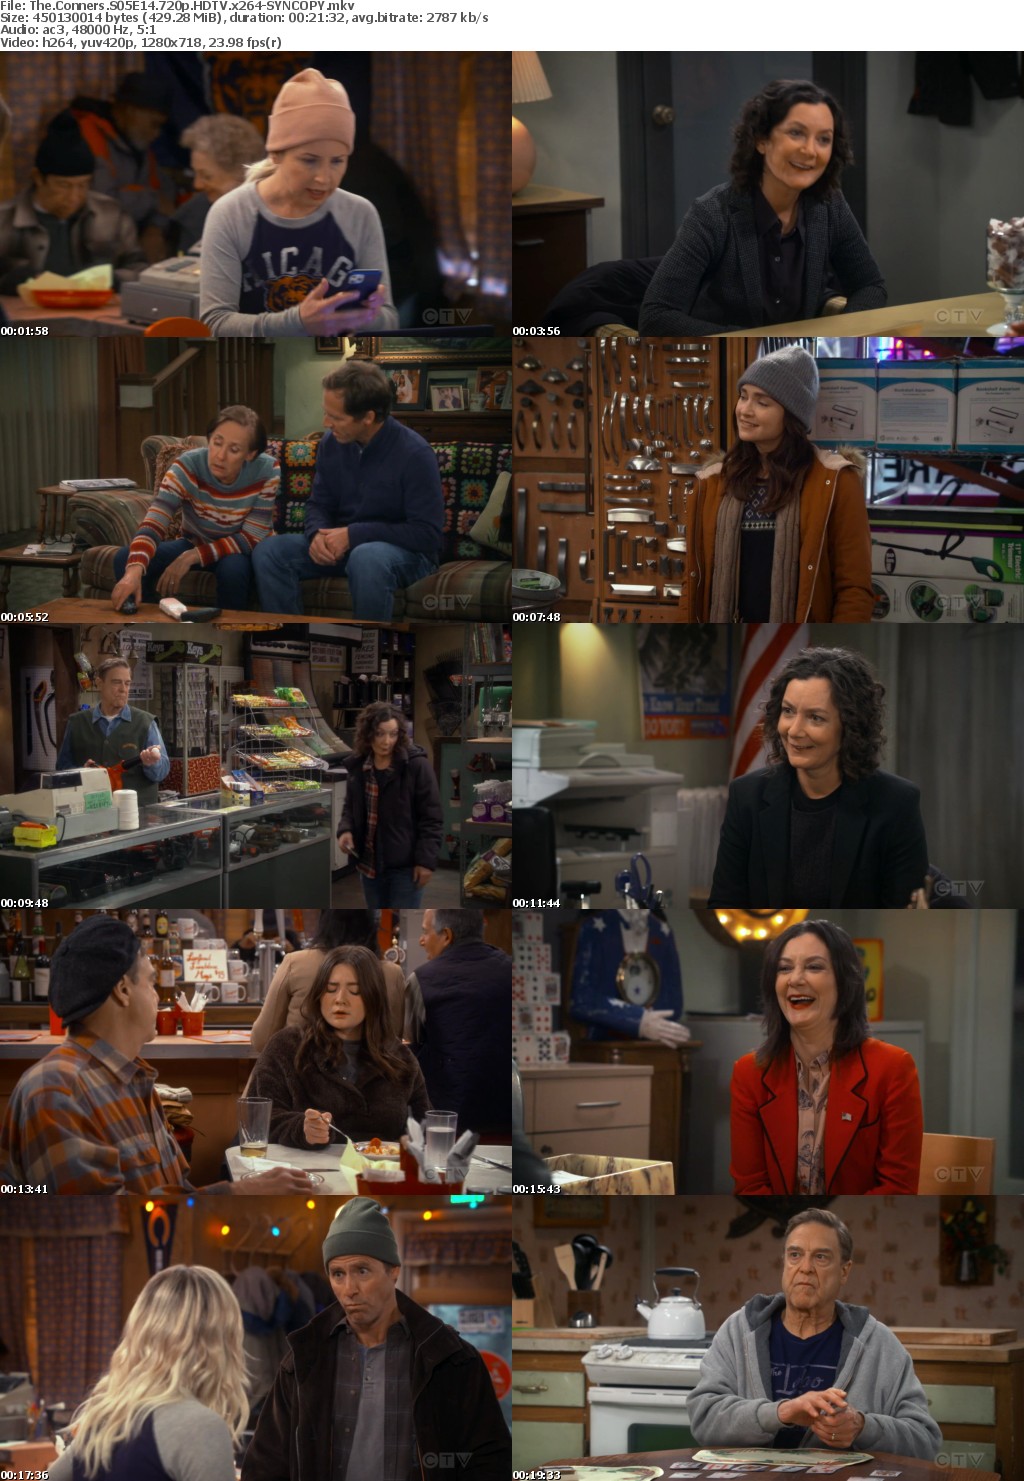 The Conners S05E14 720p HDTV x264-SYNCOPY